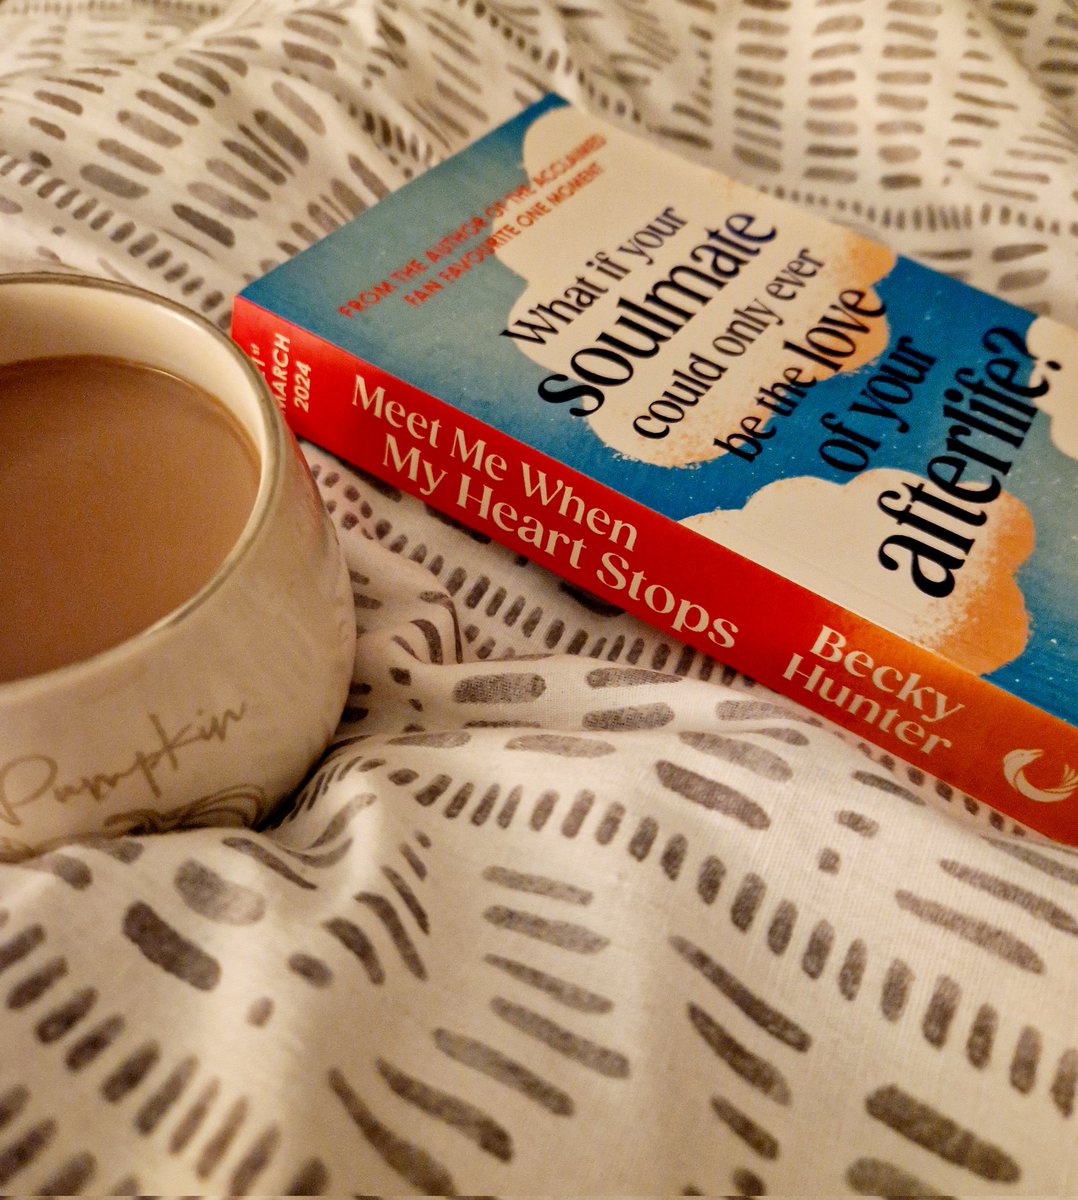 Ovaltine and heartbreak... #sundayvibes 

I'm #CurrentlyReading @Bookish_Becky's #MeetMeWhenMyHeartStops ready to review for @RandomTTours ✨️

Thanks so much, @AtlanticBooks, for sending me a copy to read in preparation for the tour 💙